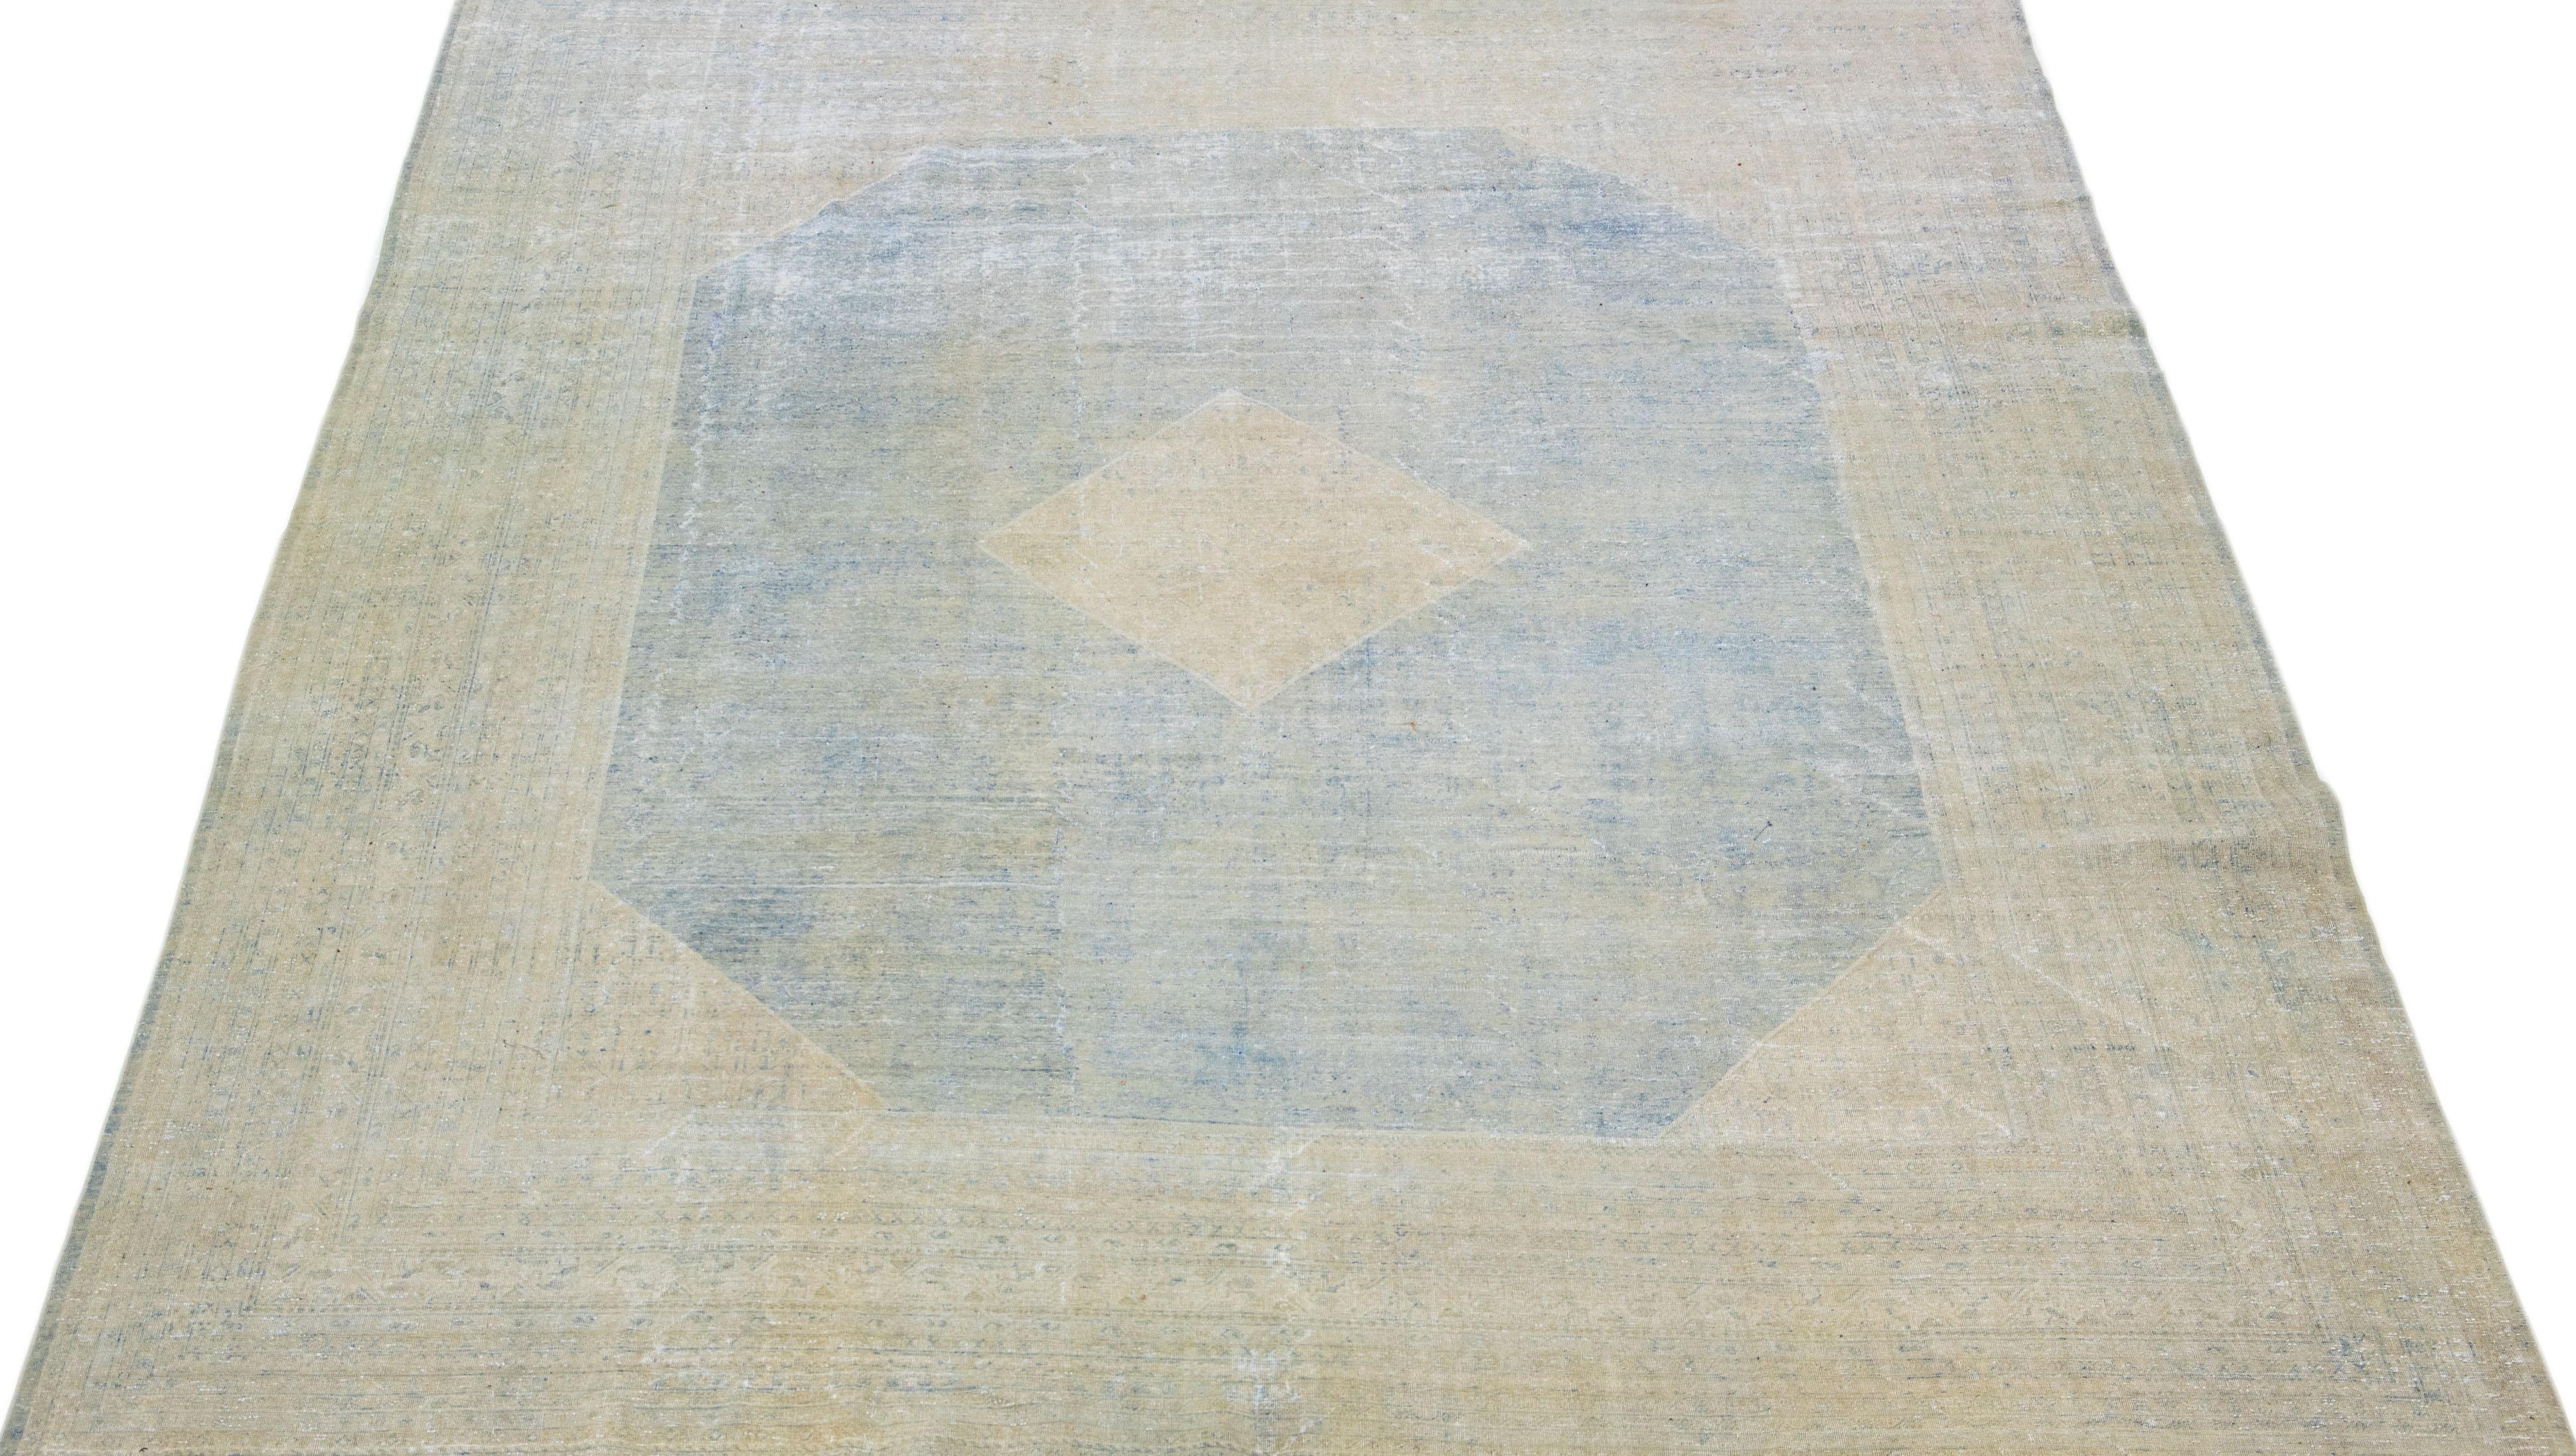 Beautiful hand-knotted antique mahal wool rug with a blue field. This Persian rug has beige accent colors in a medallion design. 

This rug measures: 9'10